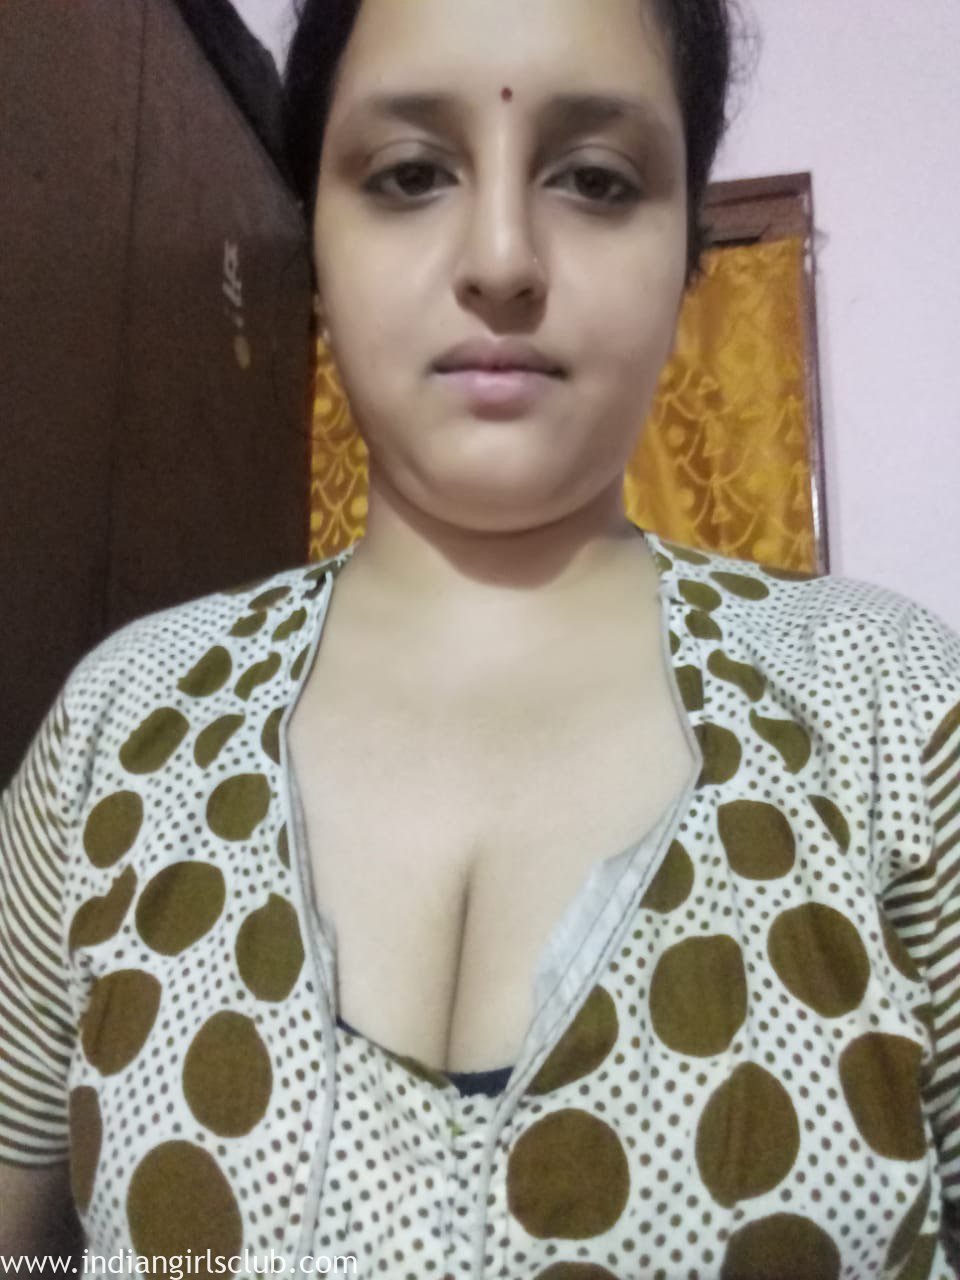 Horny Bengali Indian Housewife Ready For Hot photo